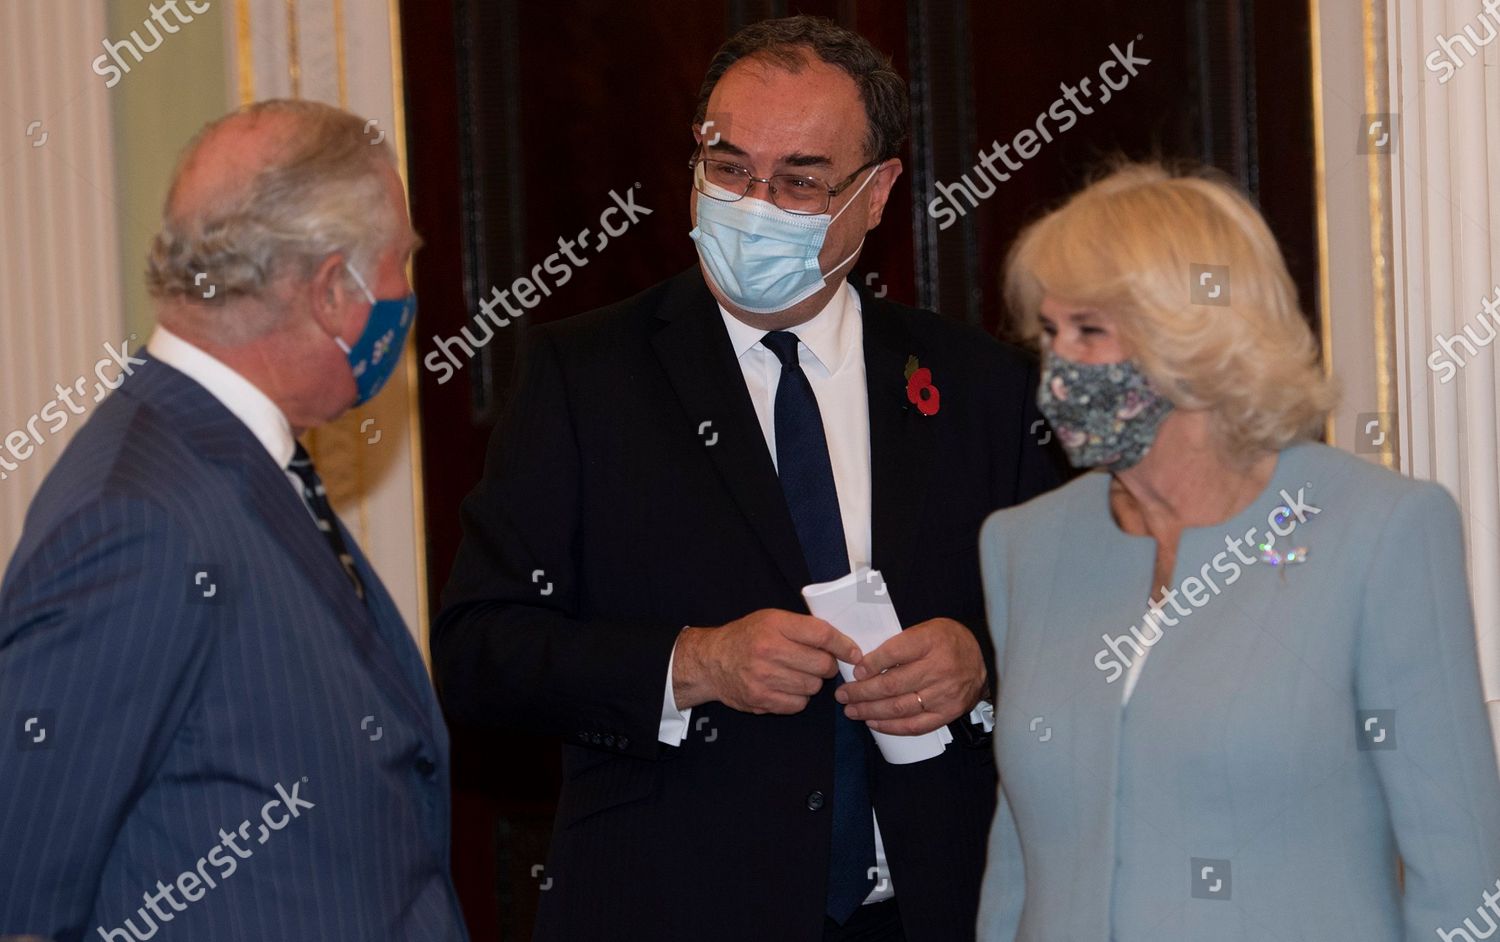 prince-charles-and-camilla-duchess-of-cornwall-visit-the-headquarters-of-the-bank-of-england-london-uk-shutterstock-editorial-10978441ae.jpg